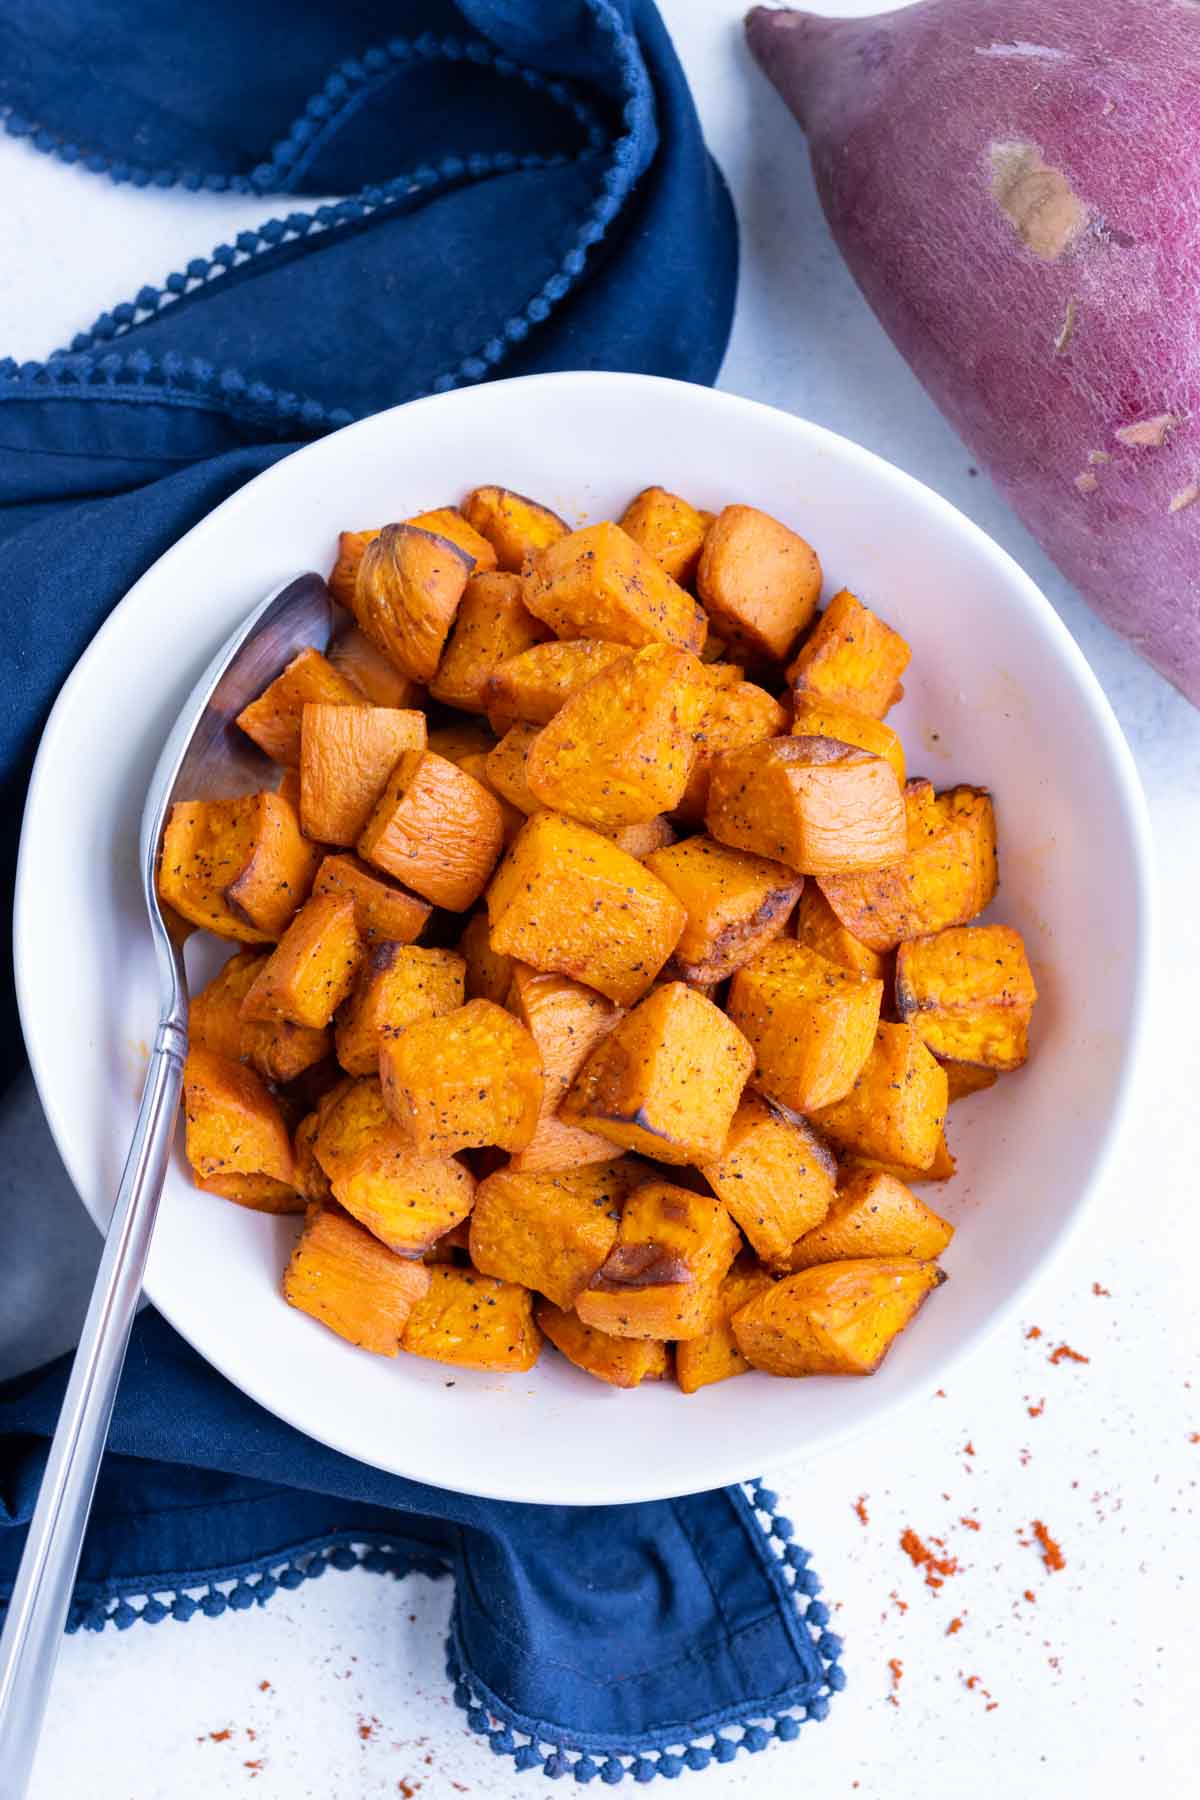 Healthy sweet potatoes from the air fryer.